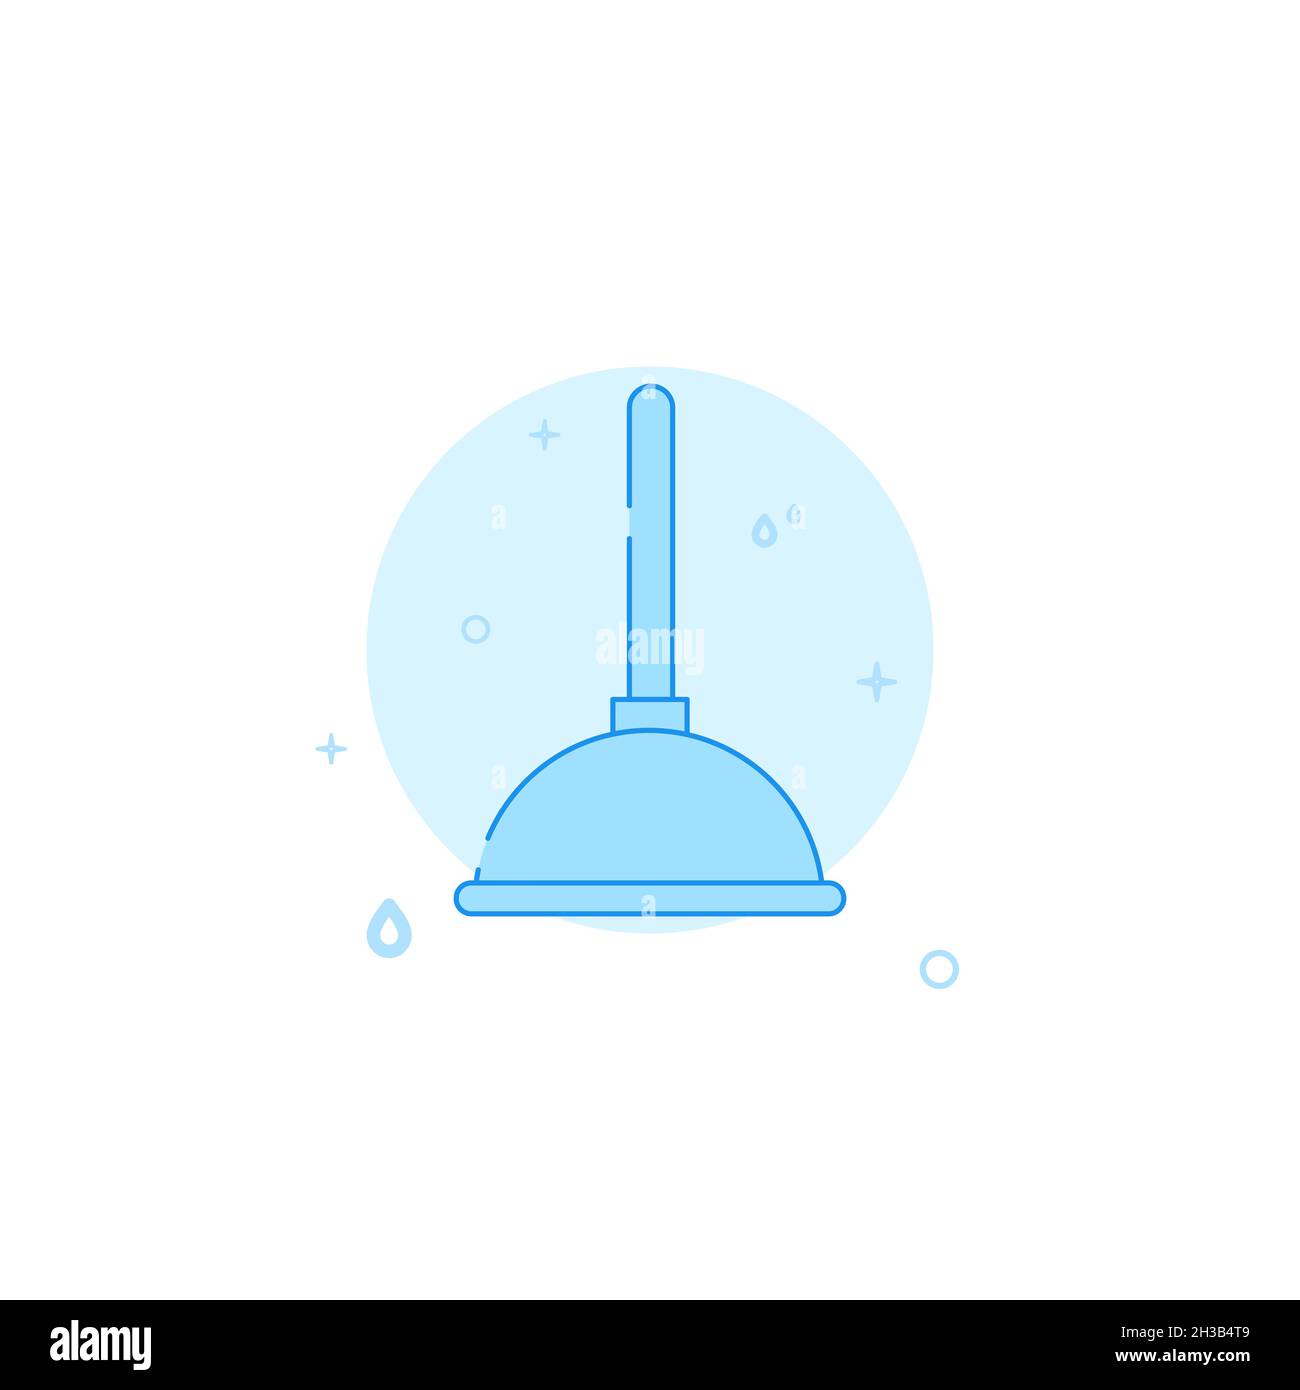 Drain pipe cleaner icon. Plumbing flat illustration. Filled line style. Blue monochrome design. Editable stroke. Adjust line weight. Stock Photo